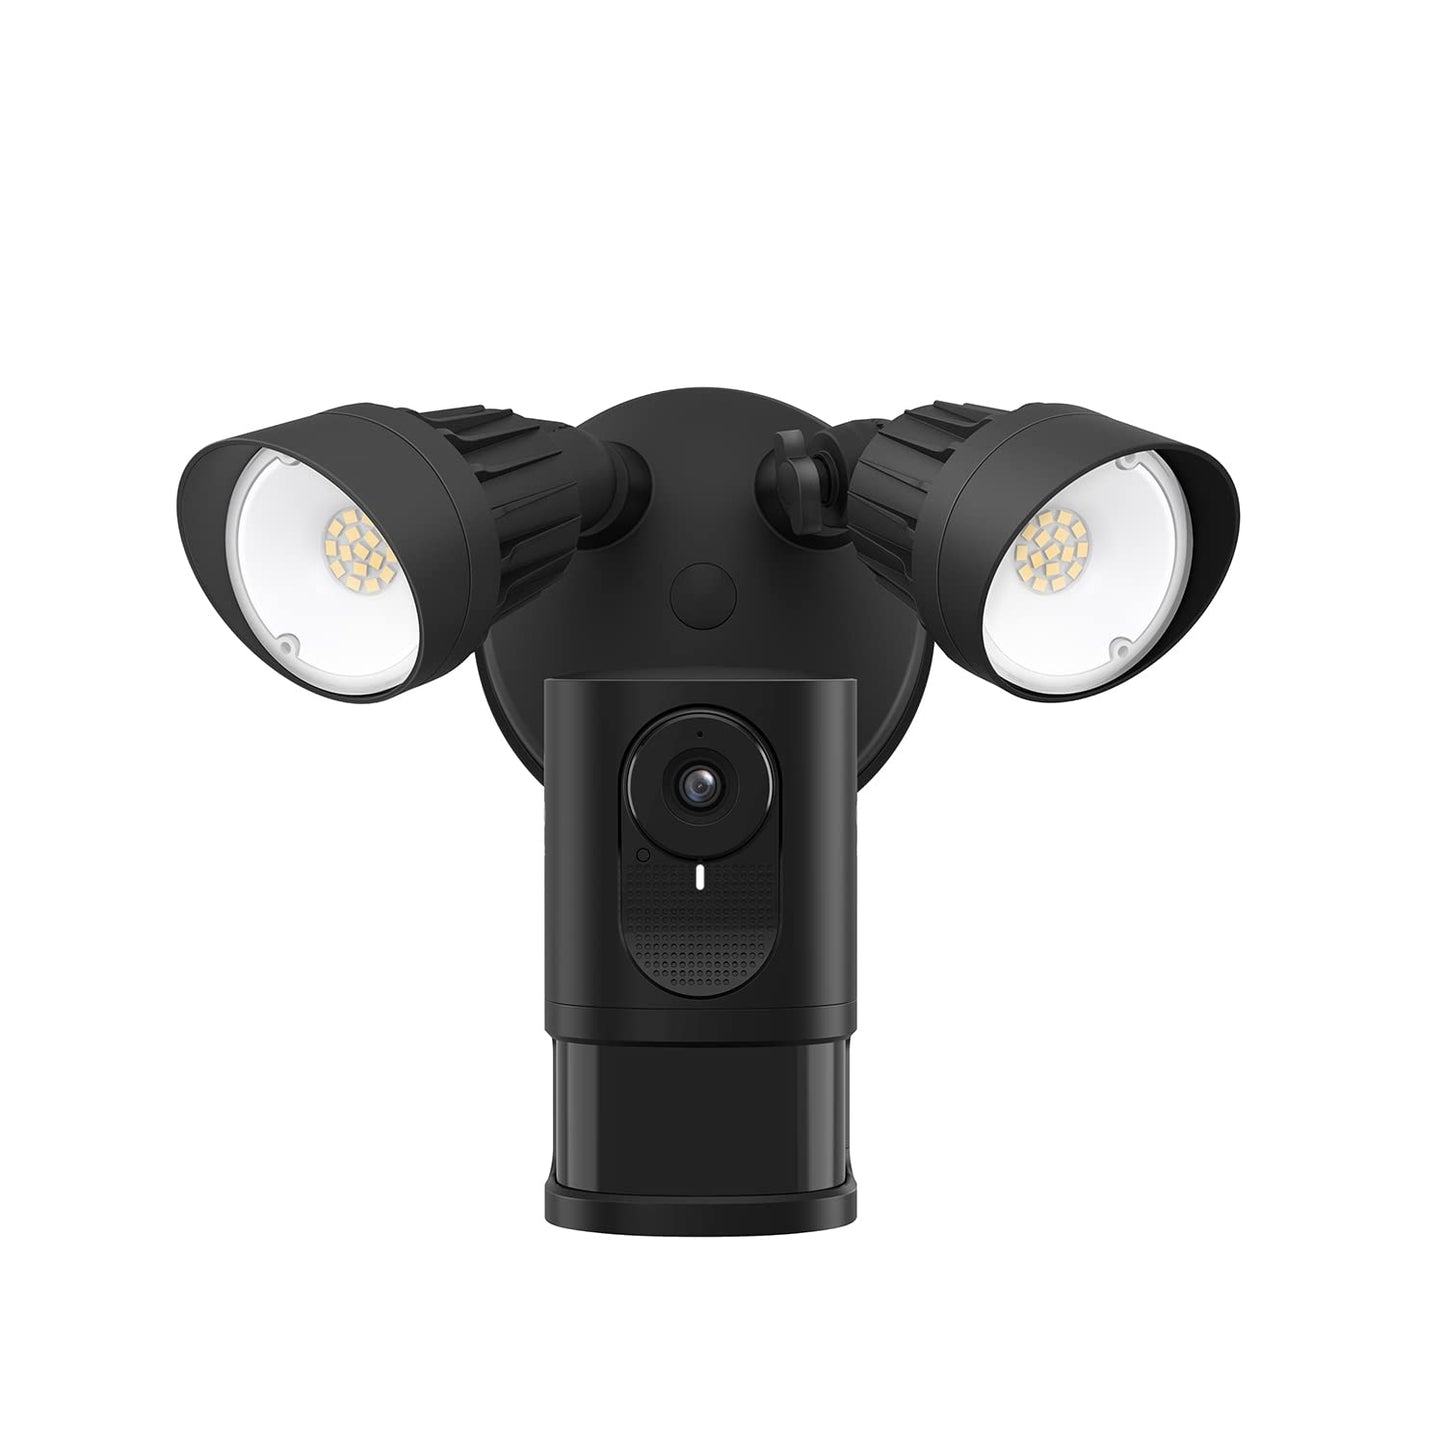 eufy security Floodlight Camera E with Built-in AI, 2K Resolution, 2-Way Audio, No Monthly Fees, 2000-Lumen Brightness, Weatherproof, Existing Outdoor Wiring and Weatherproof Junction Box Required